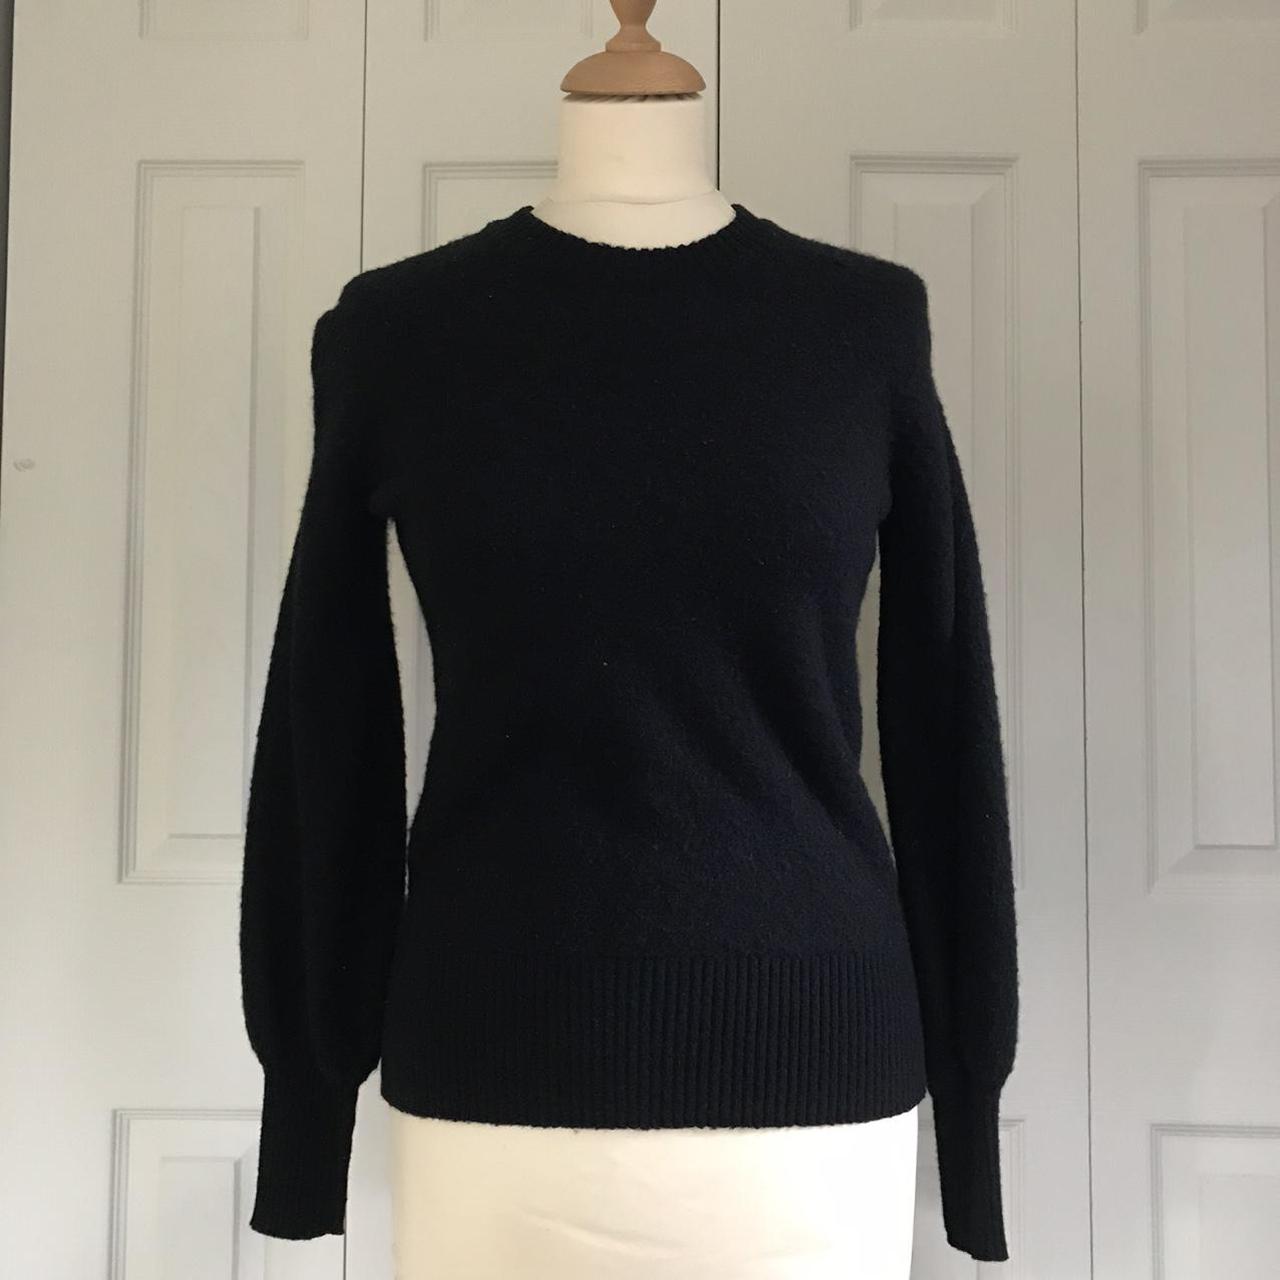 Product Image 2 - THE LIMITED CASHMERE SWEATER. Size